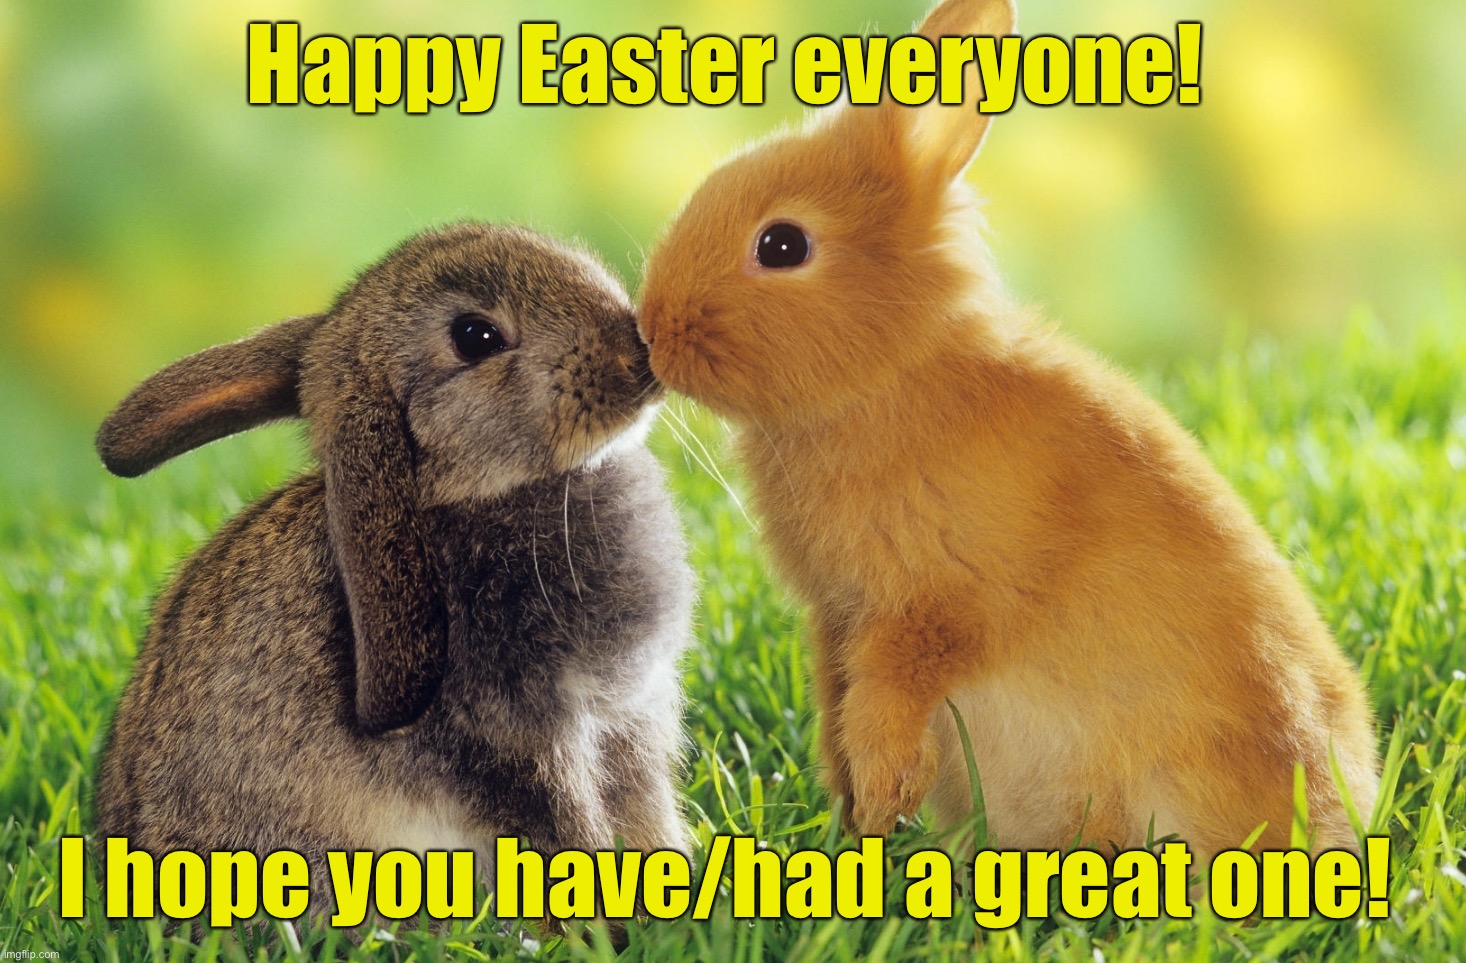 Happy Easter! | Happy Easter everyone! I hope you have/had a great one! | image tagged in easter bunnies,memes,easter,happy easter,bunnies,easter eggs | made w/ Imgflip meme maker